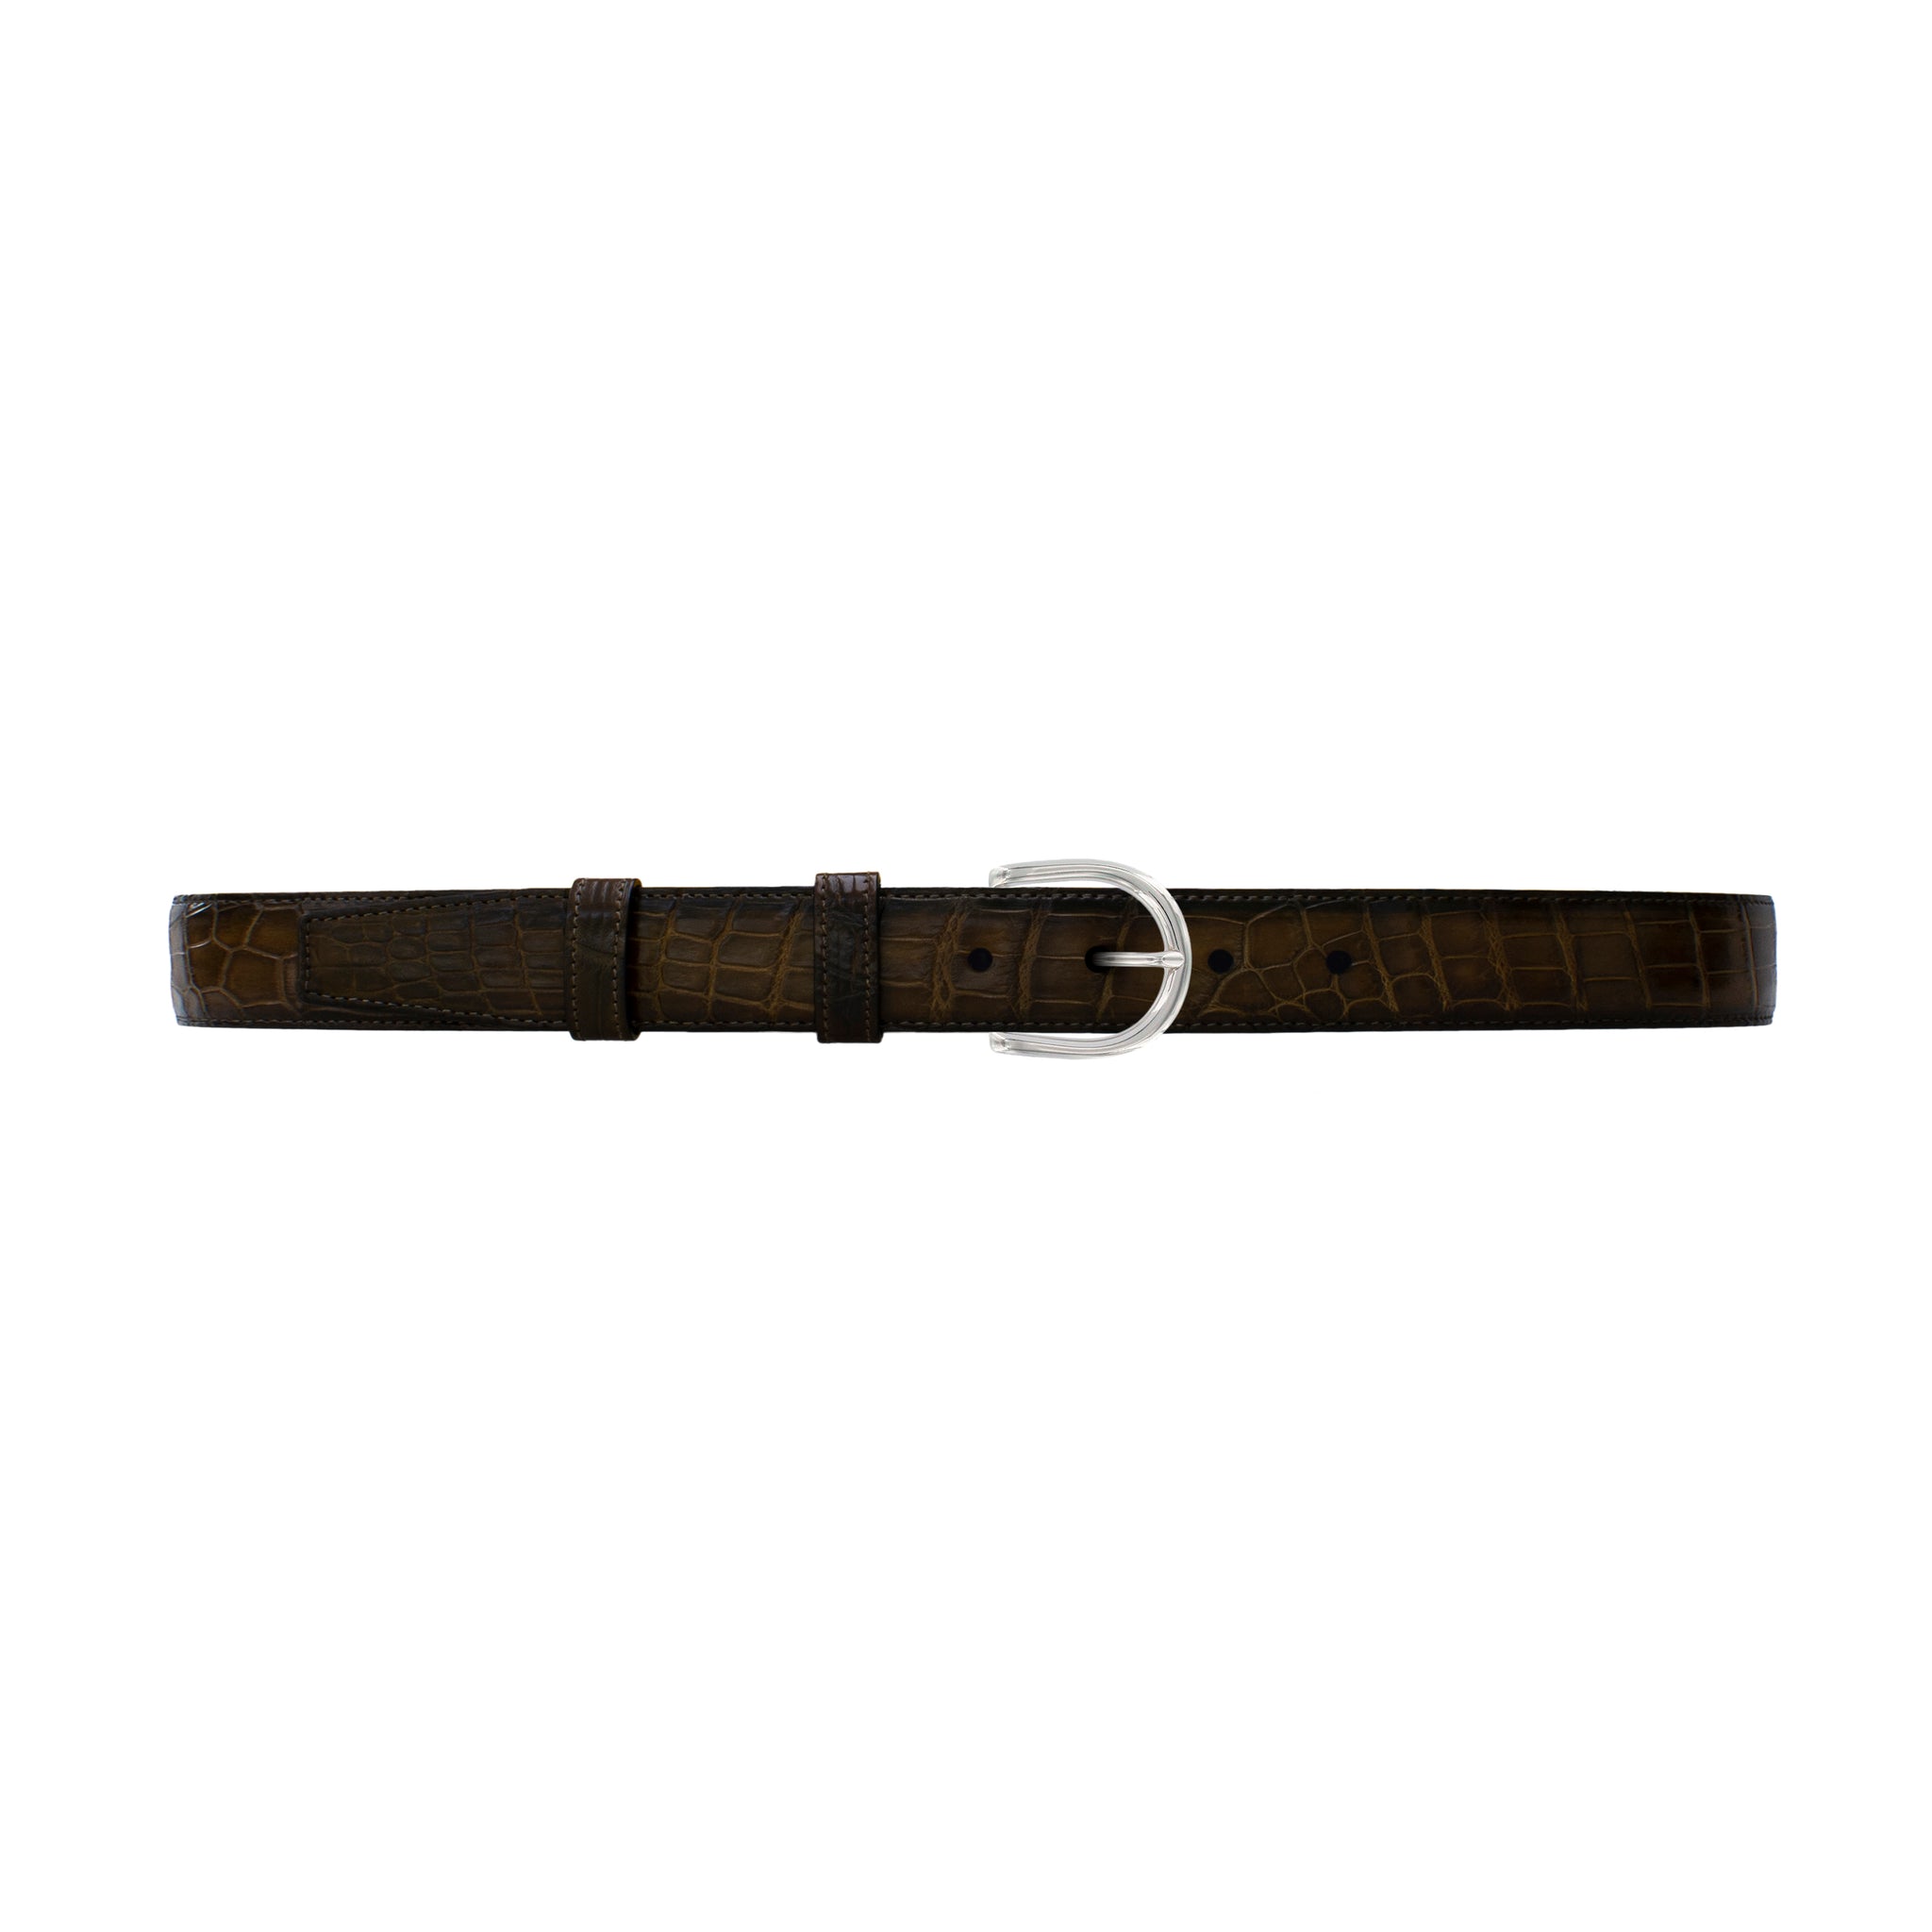 1" Walnut Patina Belt with Denver Casual Buckle in Polished Nickel